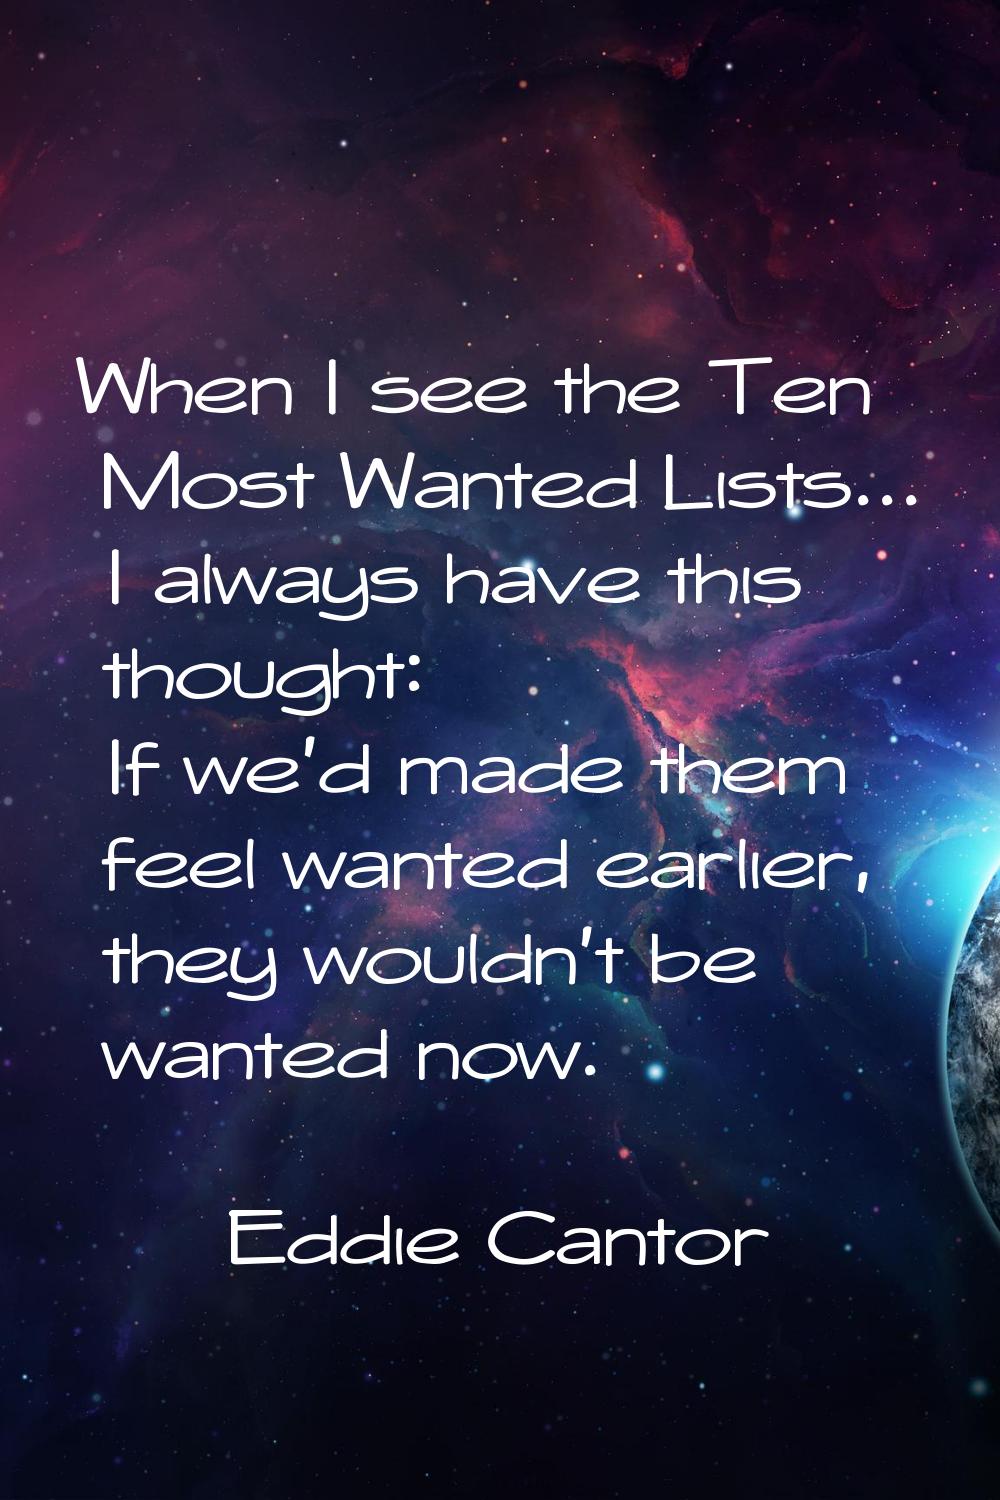 When I see the Ten Most Wanted Lists... I always have this thought: If we'd made them feel wanted e